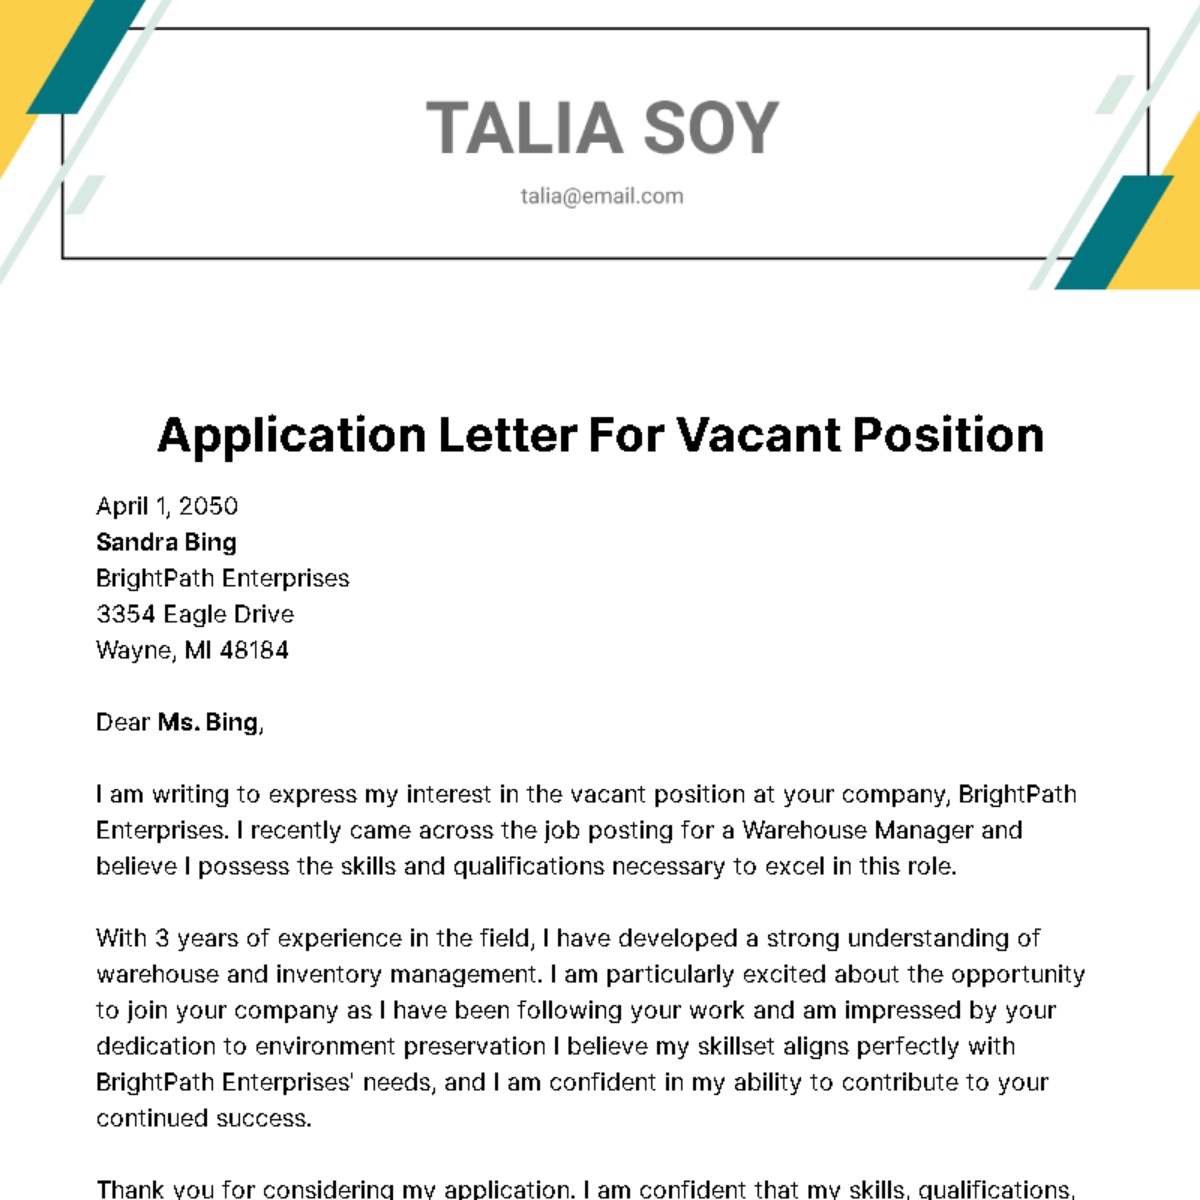 Free Application Letter for Vacant Position Template